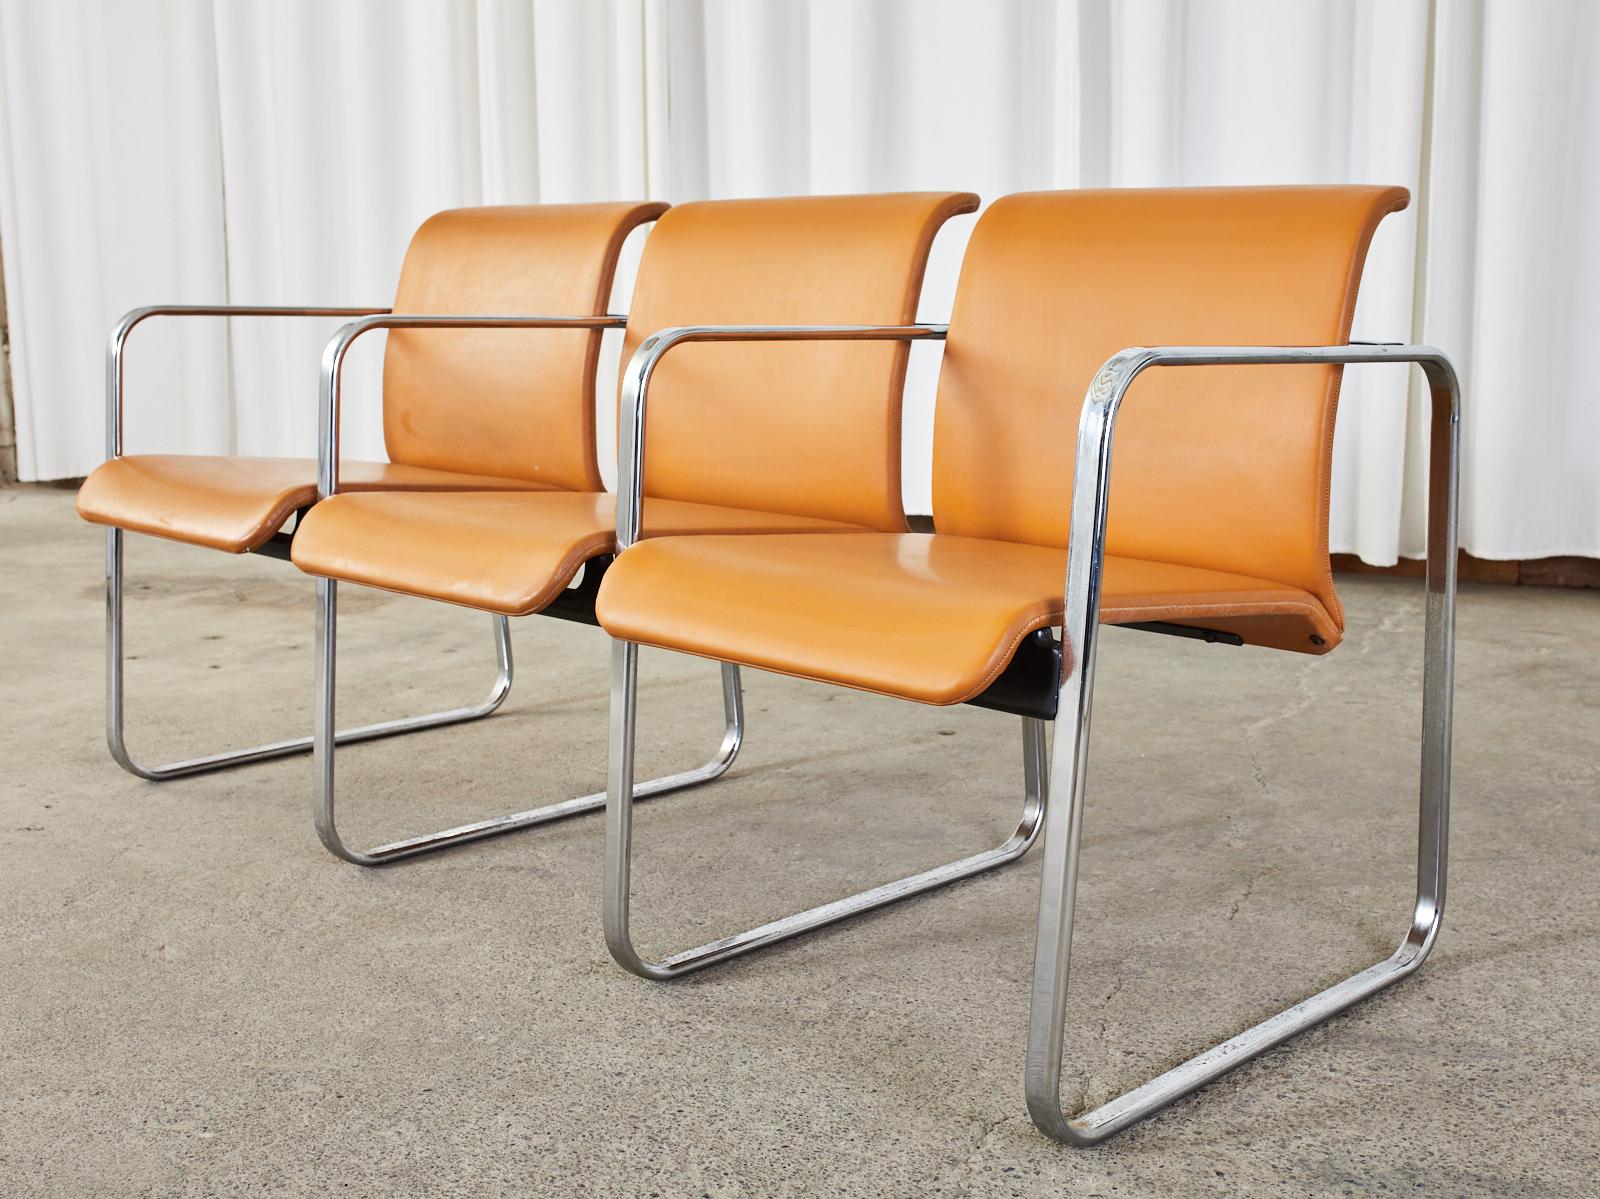 Rare Mid-Century Modern three seat tandem bench armchair designed by Peter Protzman for Herman Miller. The chair is constructed from flat bar tubular steel with a chrome finish. A set of four chrome leg/arm squares are conjoined by hidden stretchers